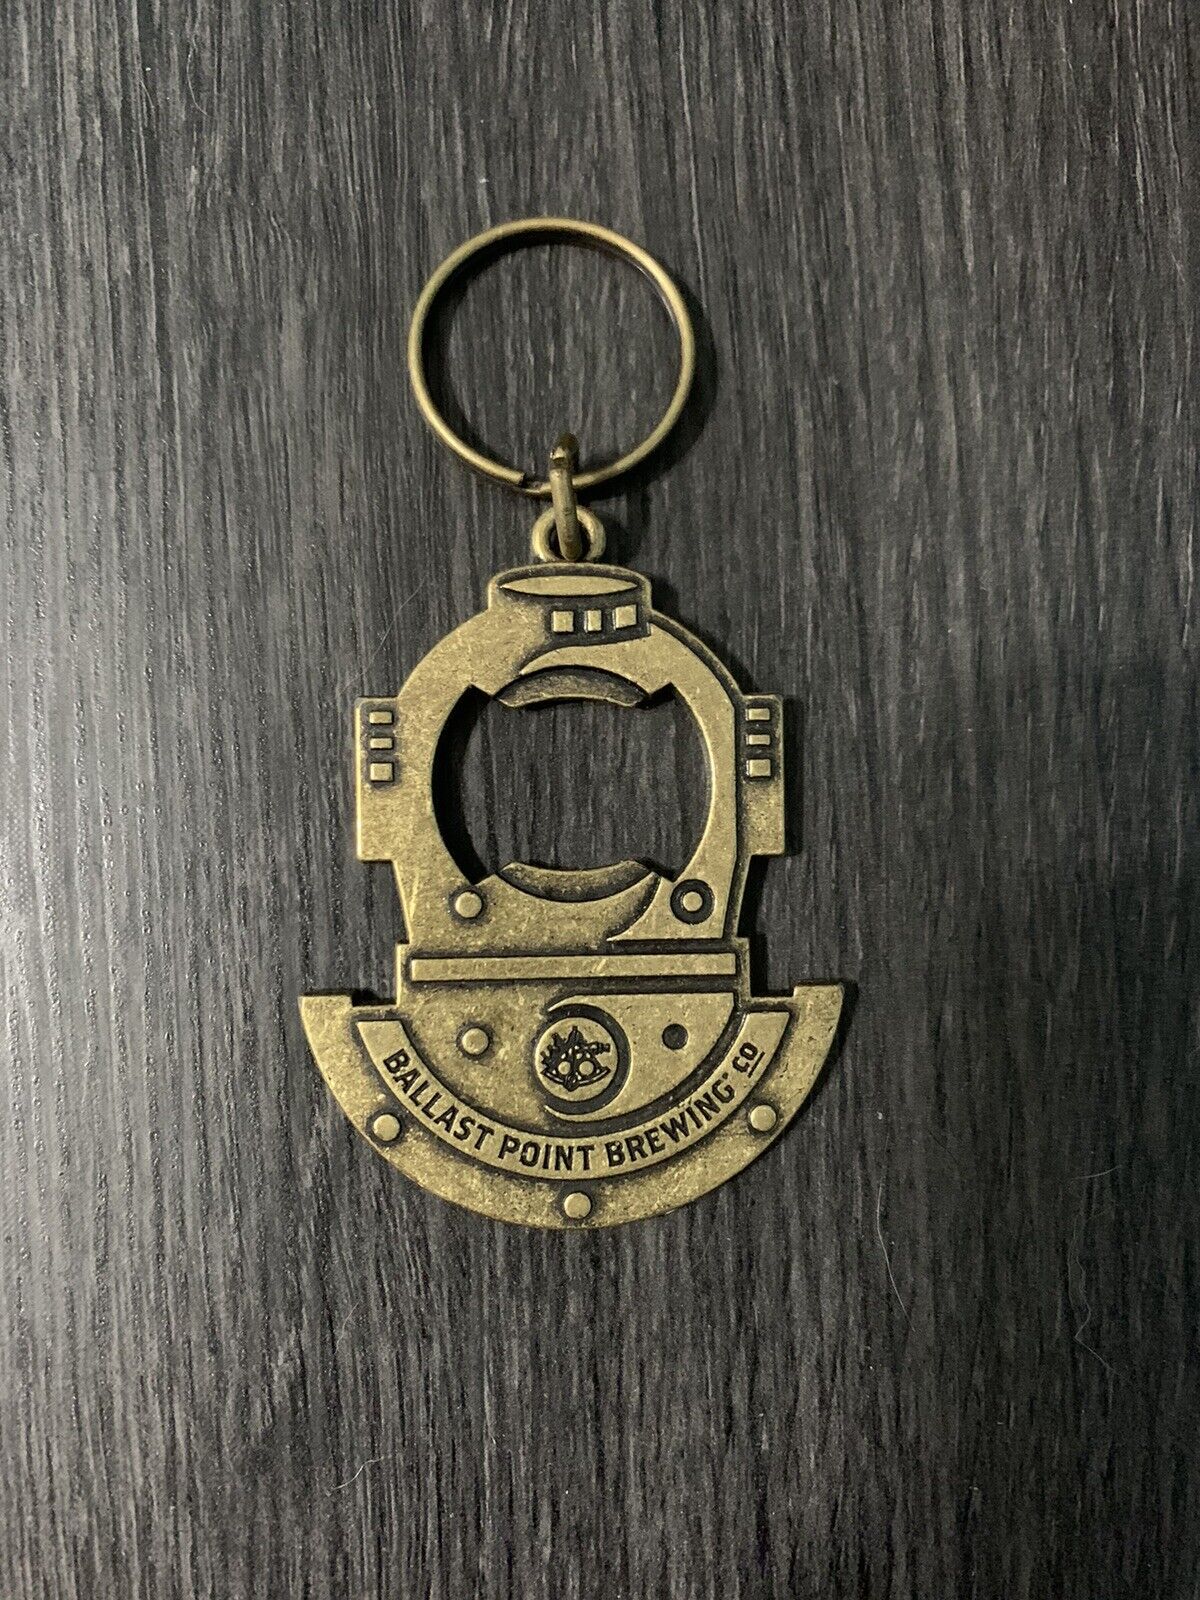 Ballast Point Brewing Company Nautical Scuba Diver Keychain Beer Bottle Opener 